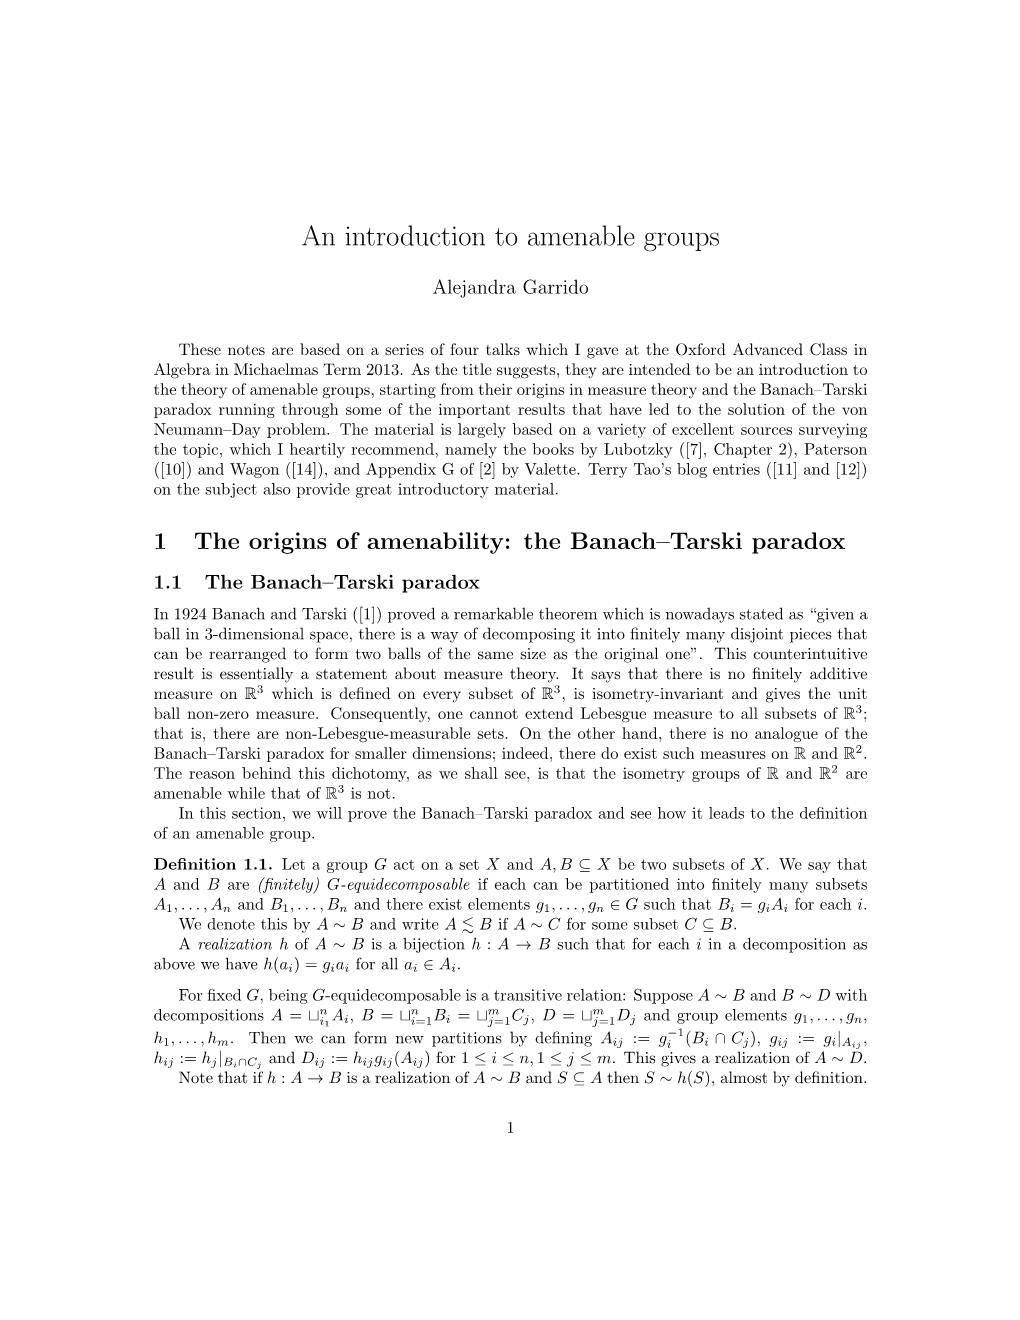 An Introduction to Amenable Groups